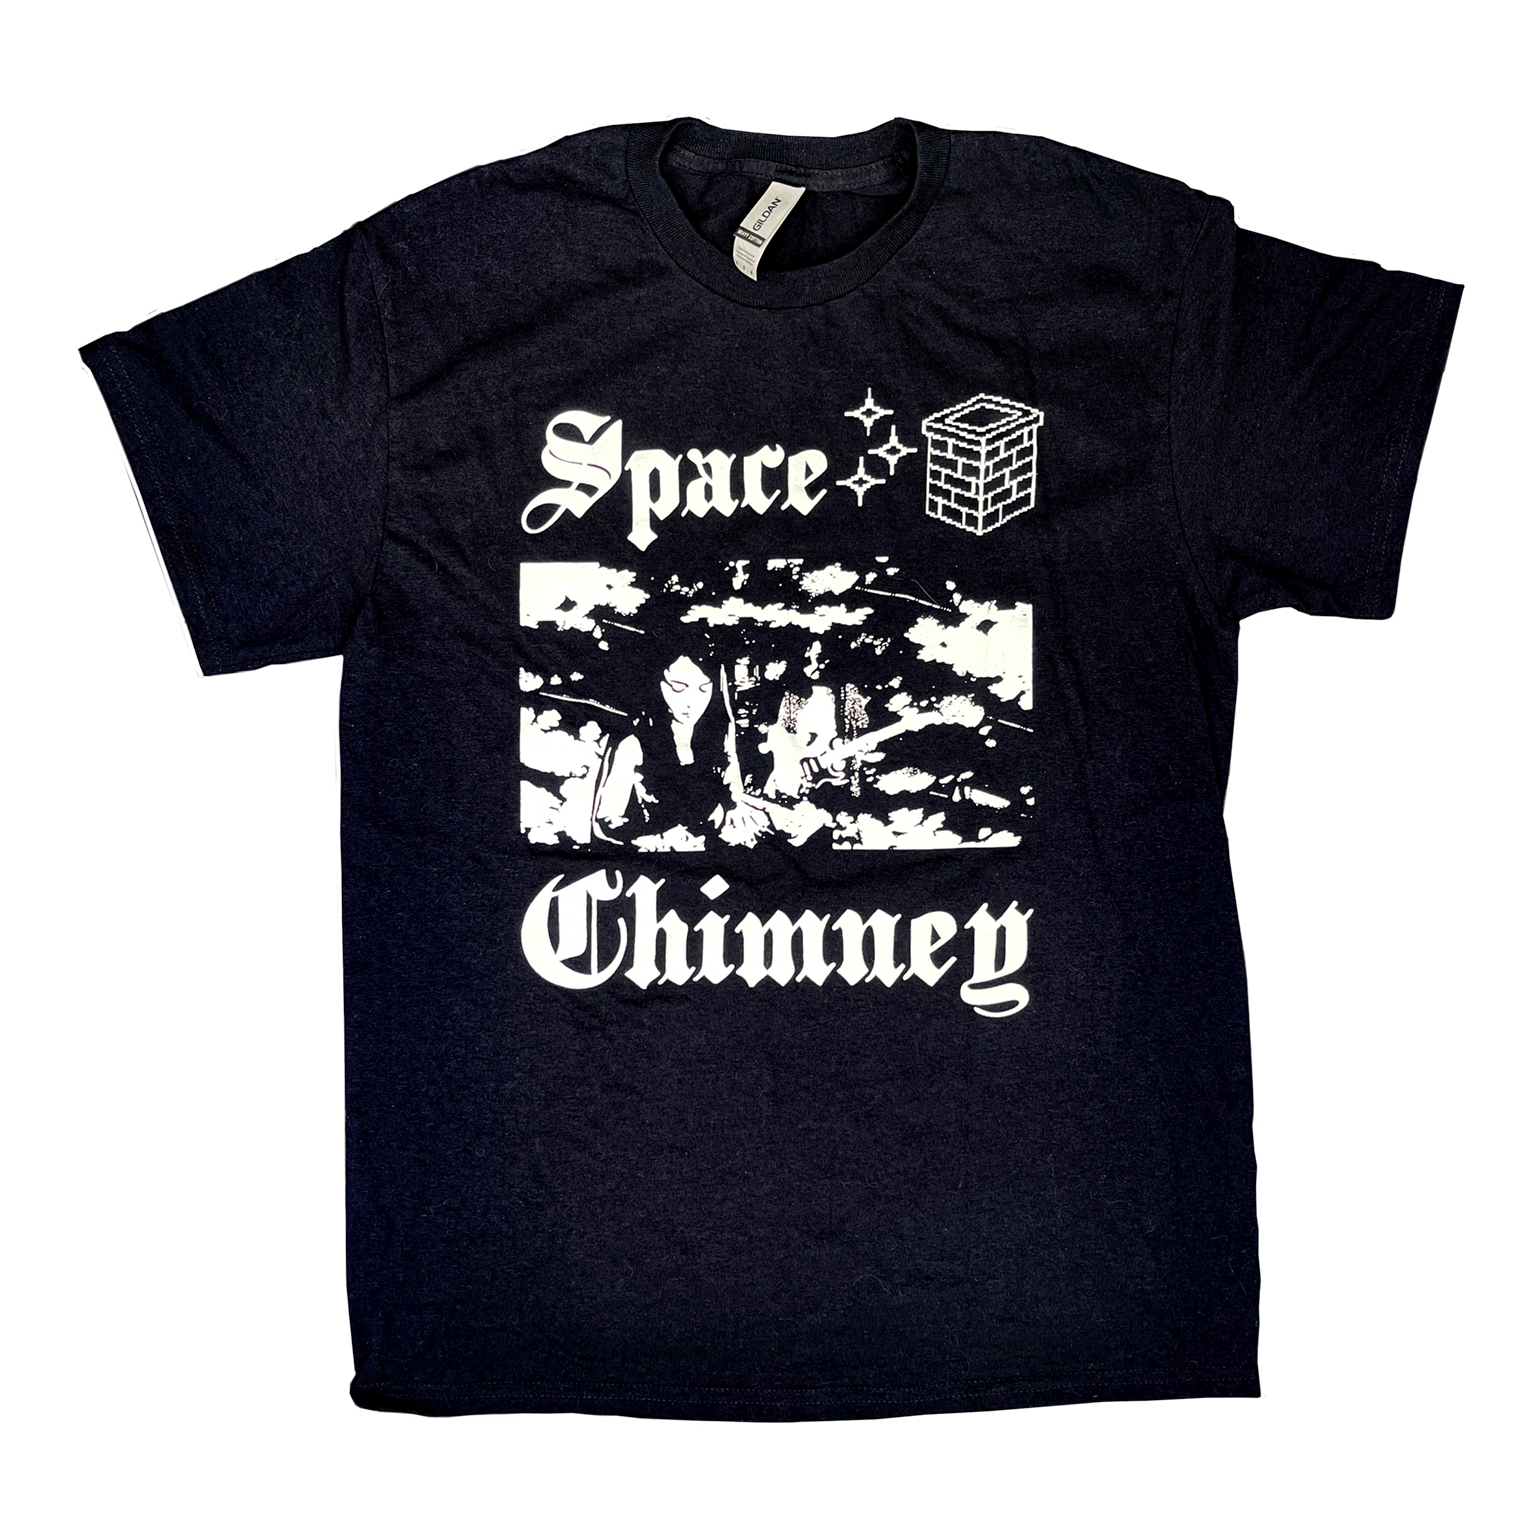 Space Chimney Any Clean Pill T-Shirt